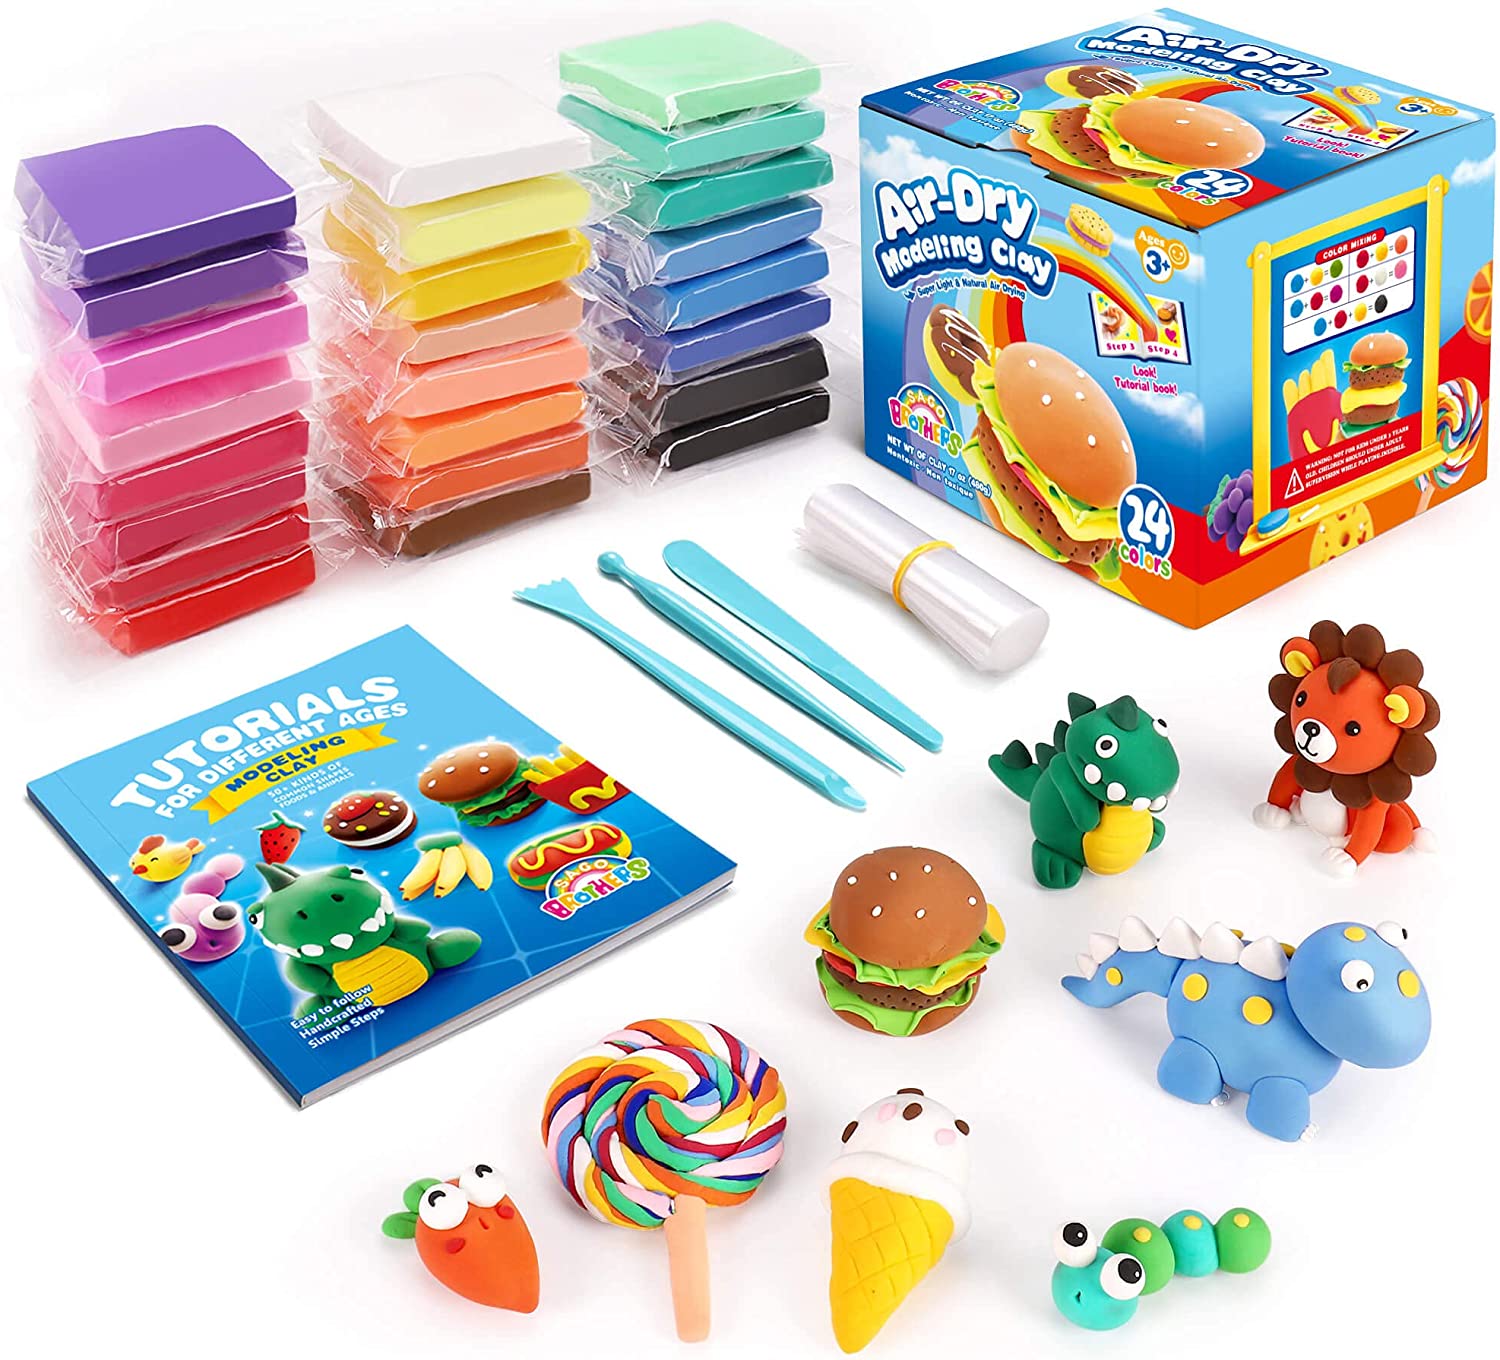 24 Colors Sago Brothers Air Dry Clay Kit w/ Tools & Tutorial $11.50 + F/S w/ Prime or on Orders $25+